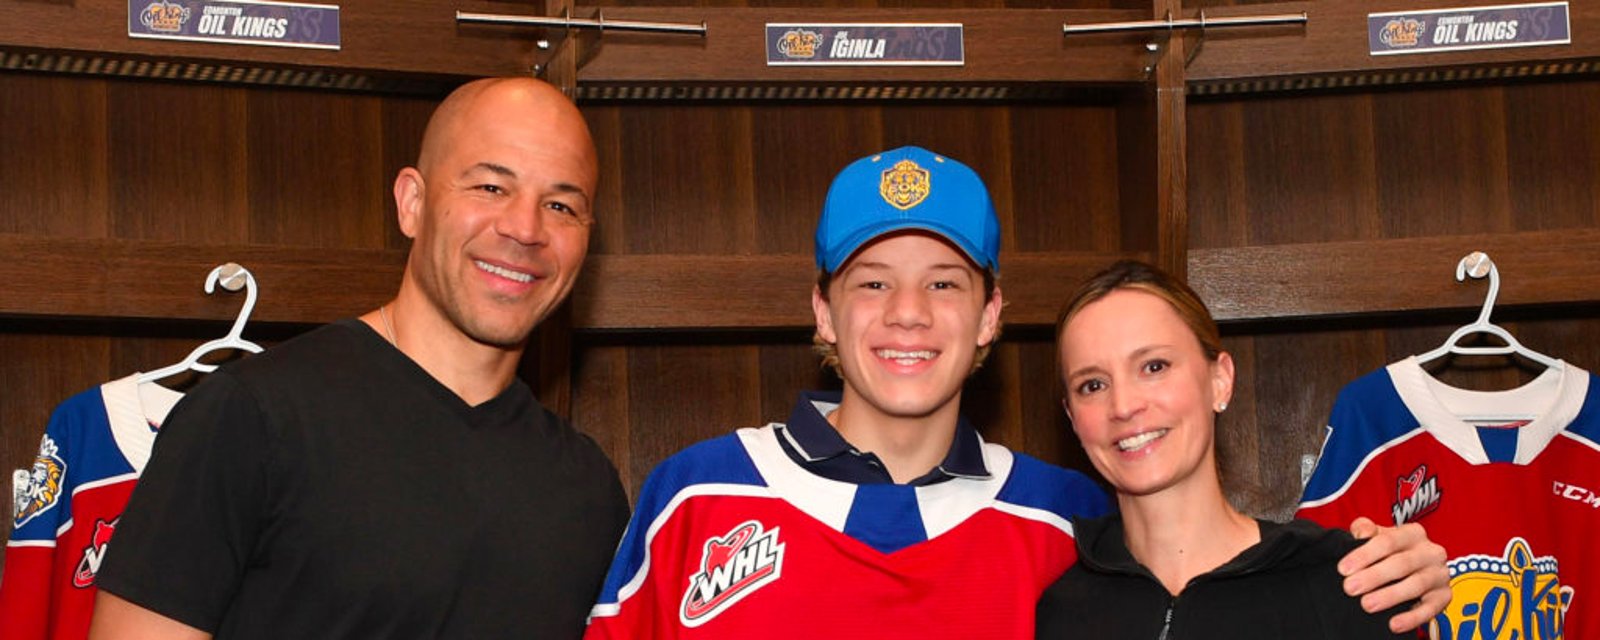 Jarome Iginla’s son has been traded!